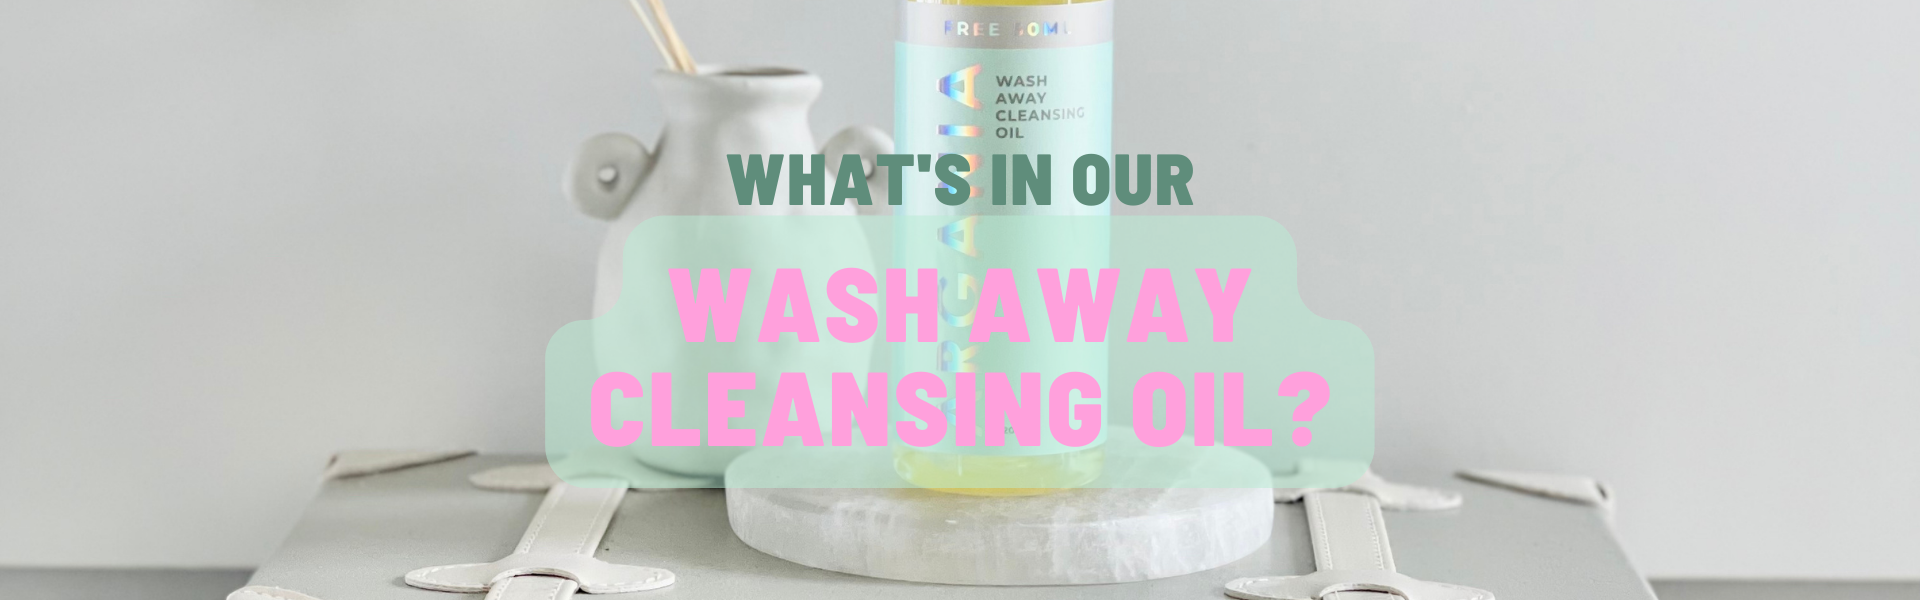 What's in our Wash Away Cleansing Oil?